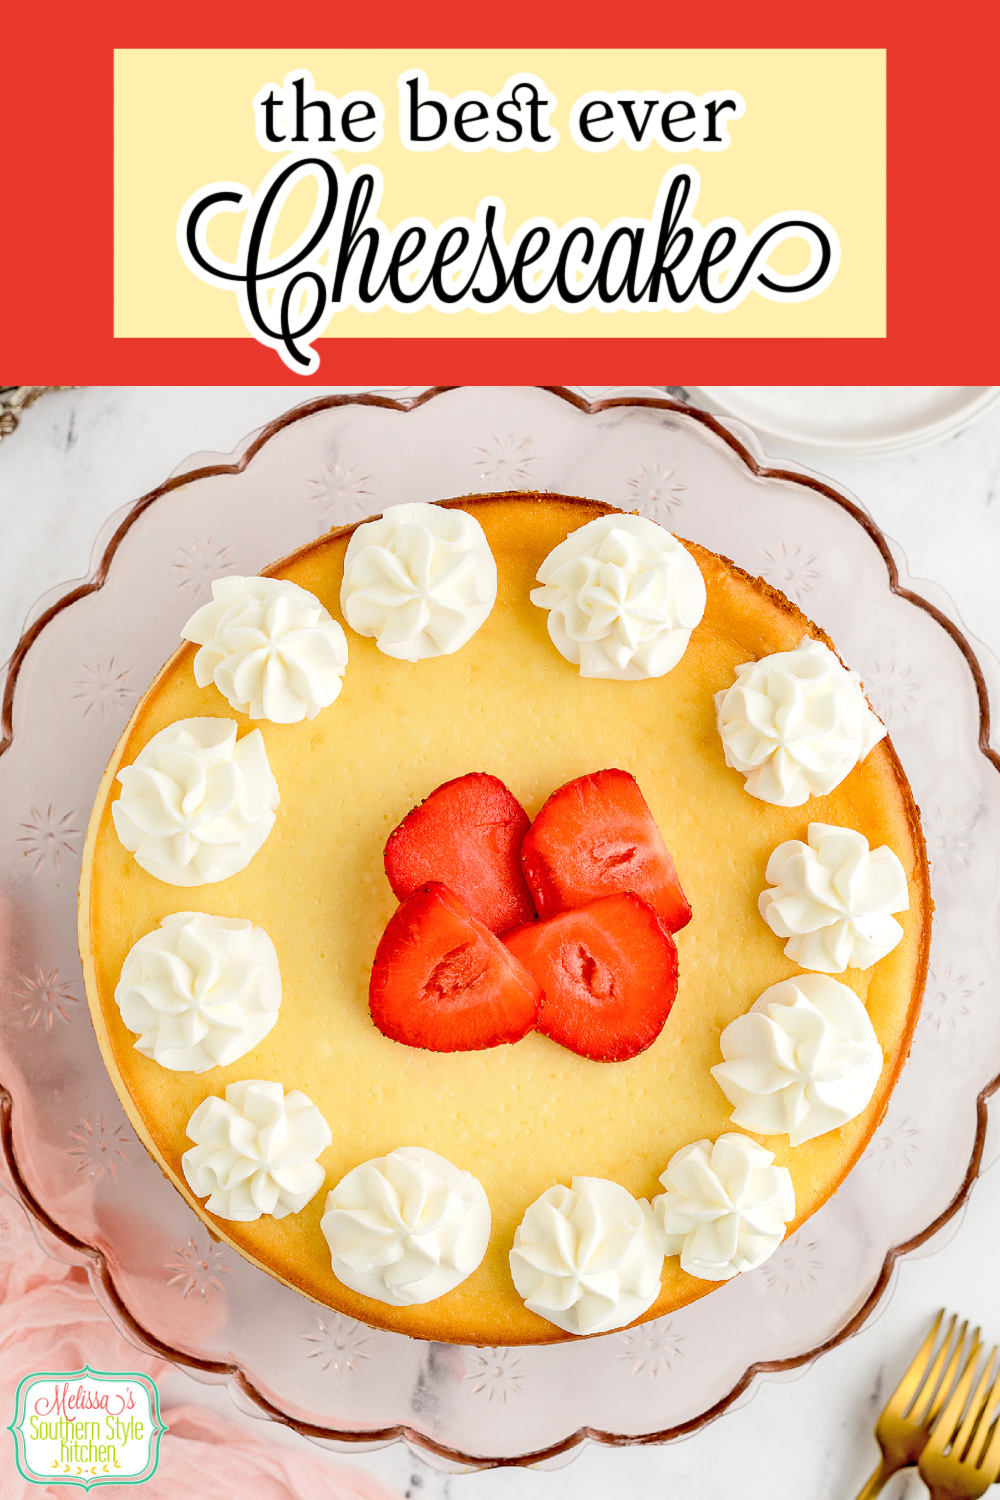 This vanilla Cheesecake Recipe can be garnished with macerated berries such as blueberries, strawberries or your favorite pie filling. #cheesecake #newyorkcheesecake #cheesecakerecipe #dessert #bestcheesecakerecipe #vanillacheesecake